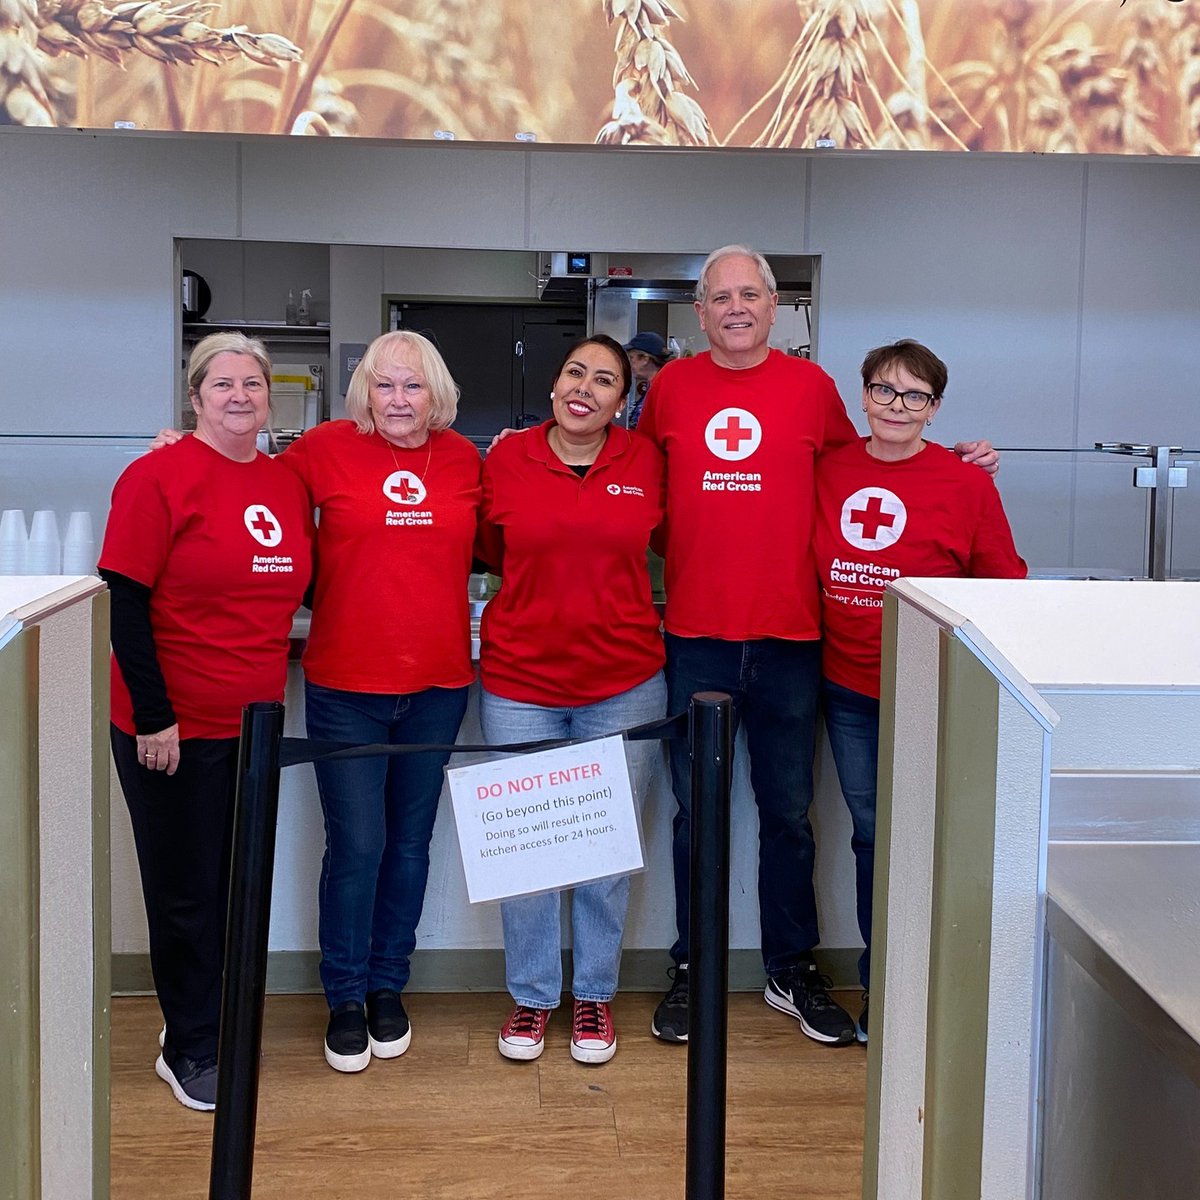 A few of our wonderful volunteers spend their Valentine's day at the Lantern House @Homelessshelter in Ogden, serving food to fellow Utahns in need of a hand. Thank you for your work and your mission; we're honored to be working alongside you to lift our community ❤️ 💪